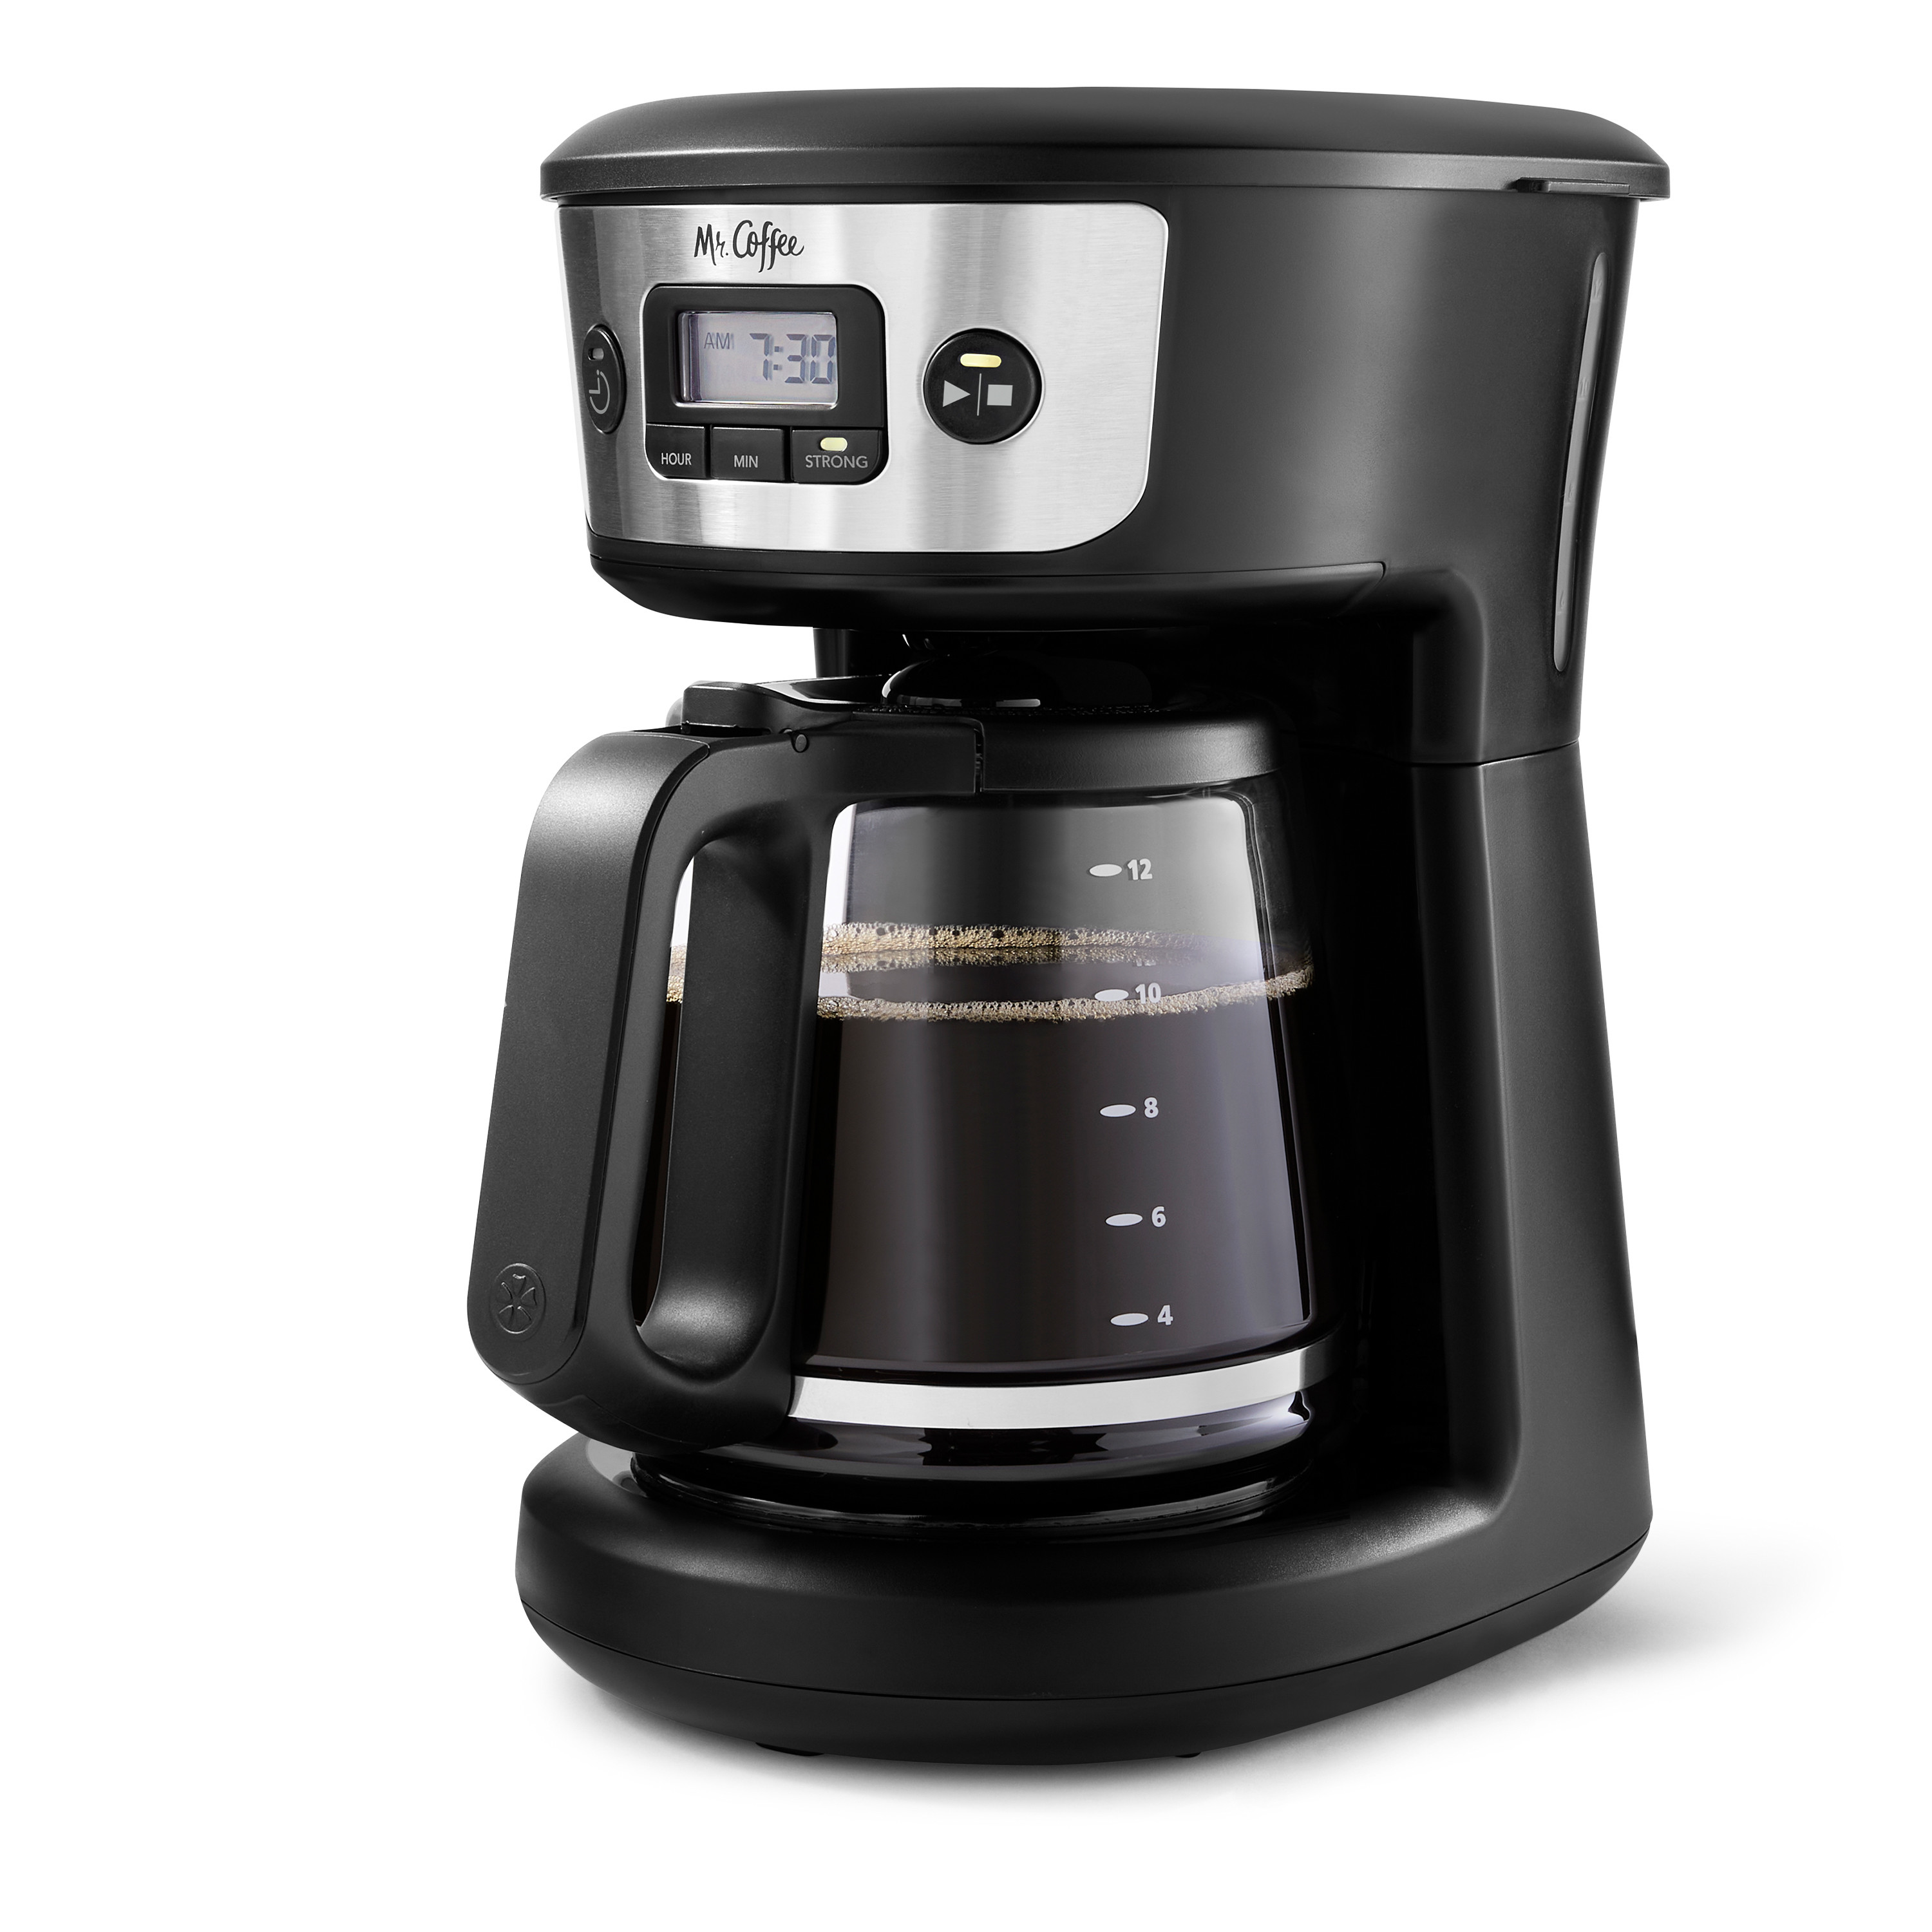 Mr. Coffee® 12-Cup Programmable Coffee Maker with Strong Brew Selector, Stainless Steel - image 3 of 10